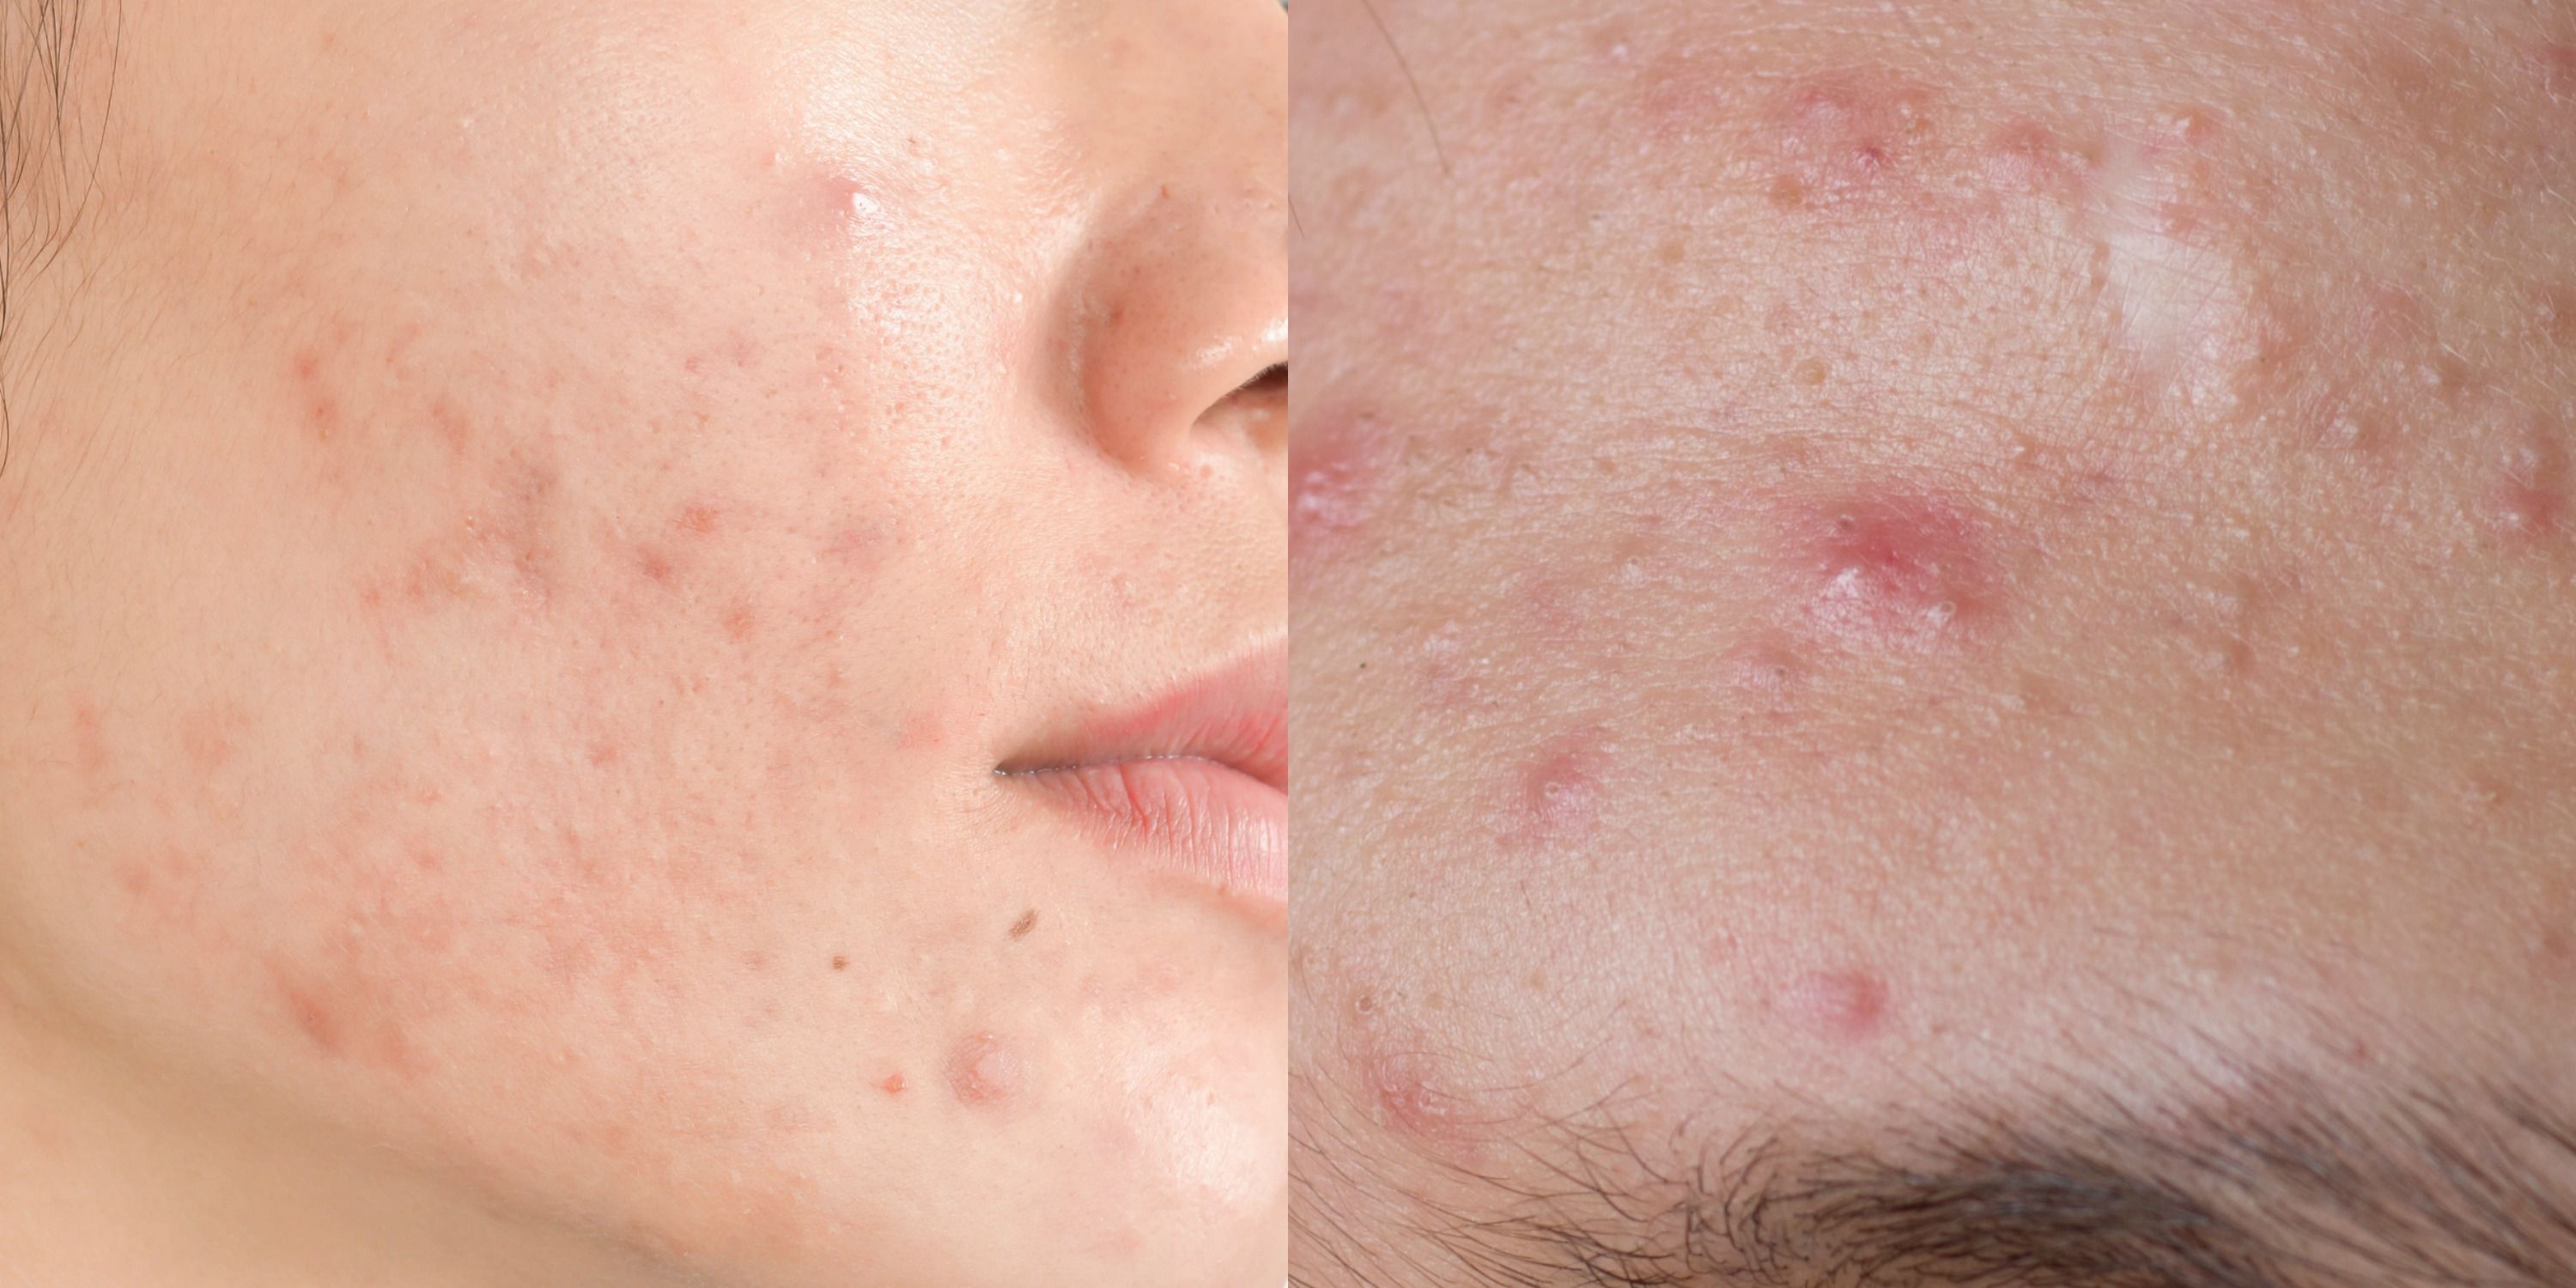 6 Adult Acne Causes And How To Get Rid Of It Say Dermatologists